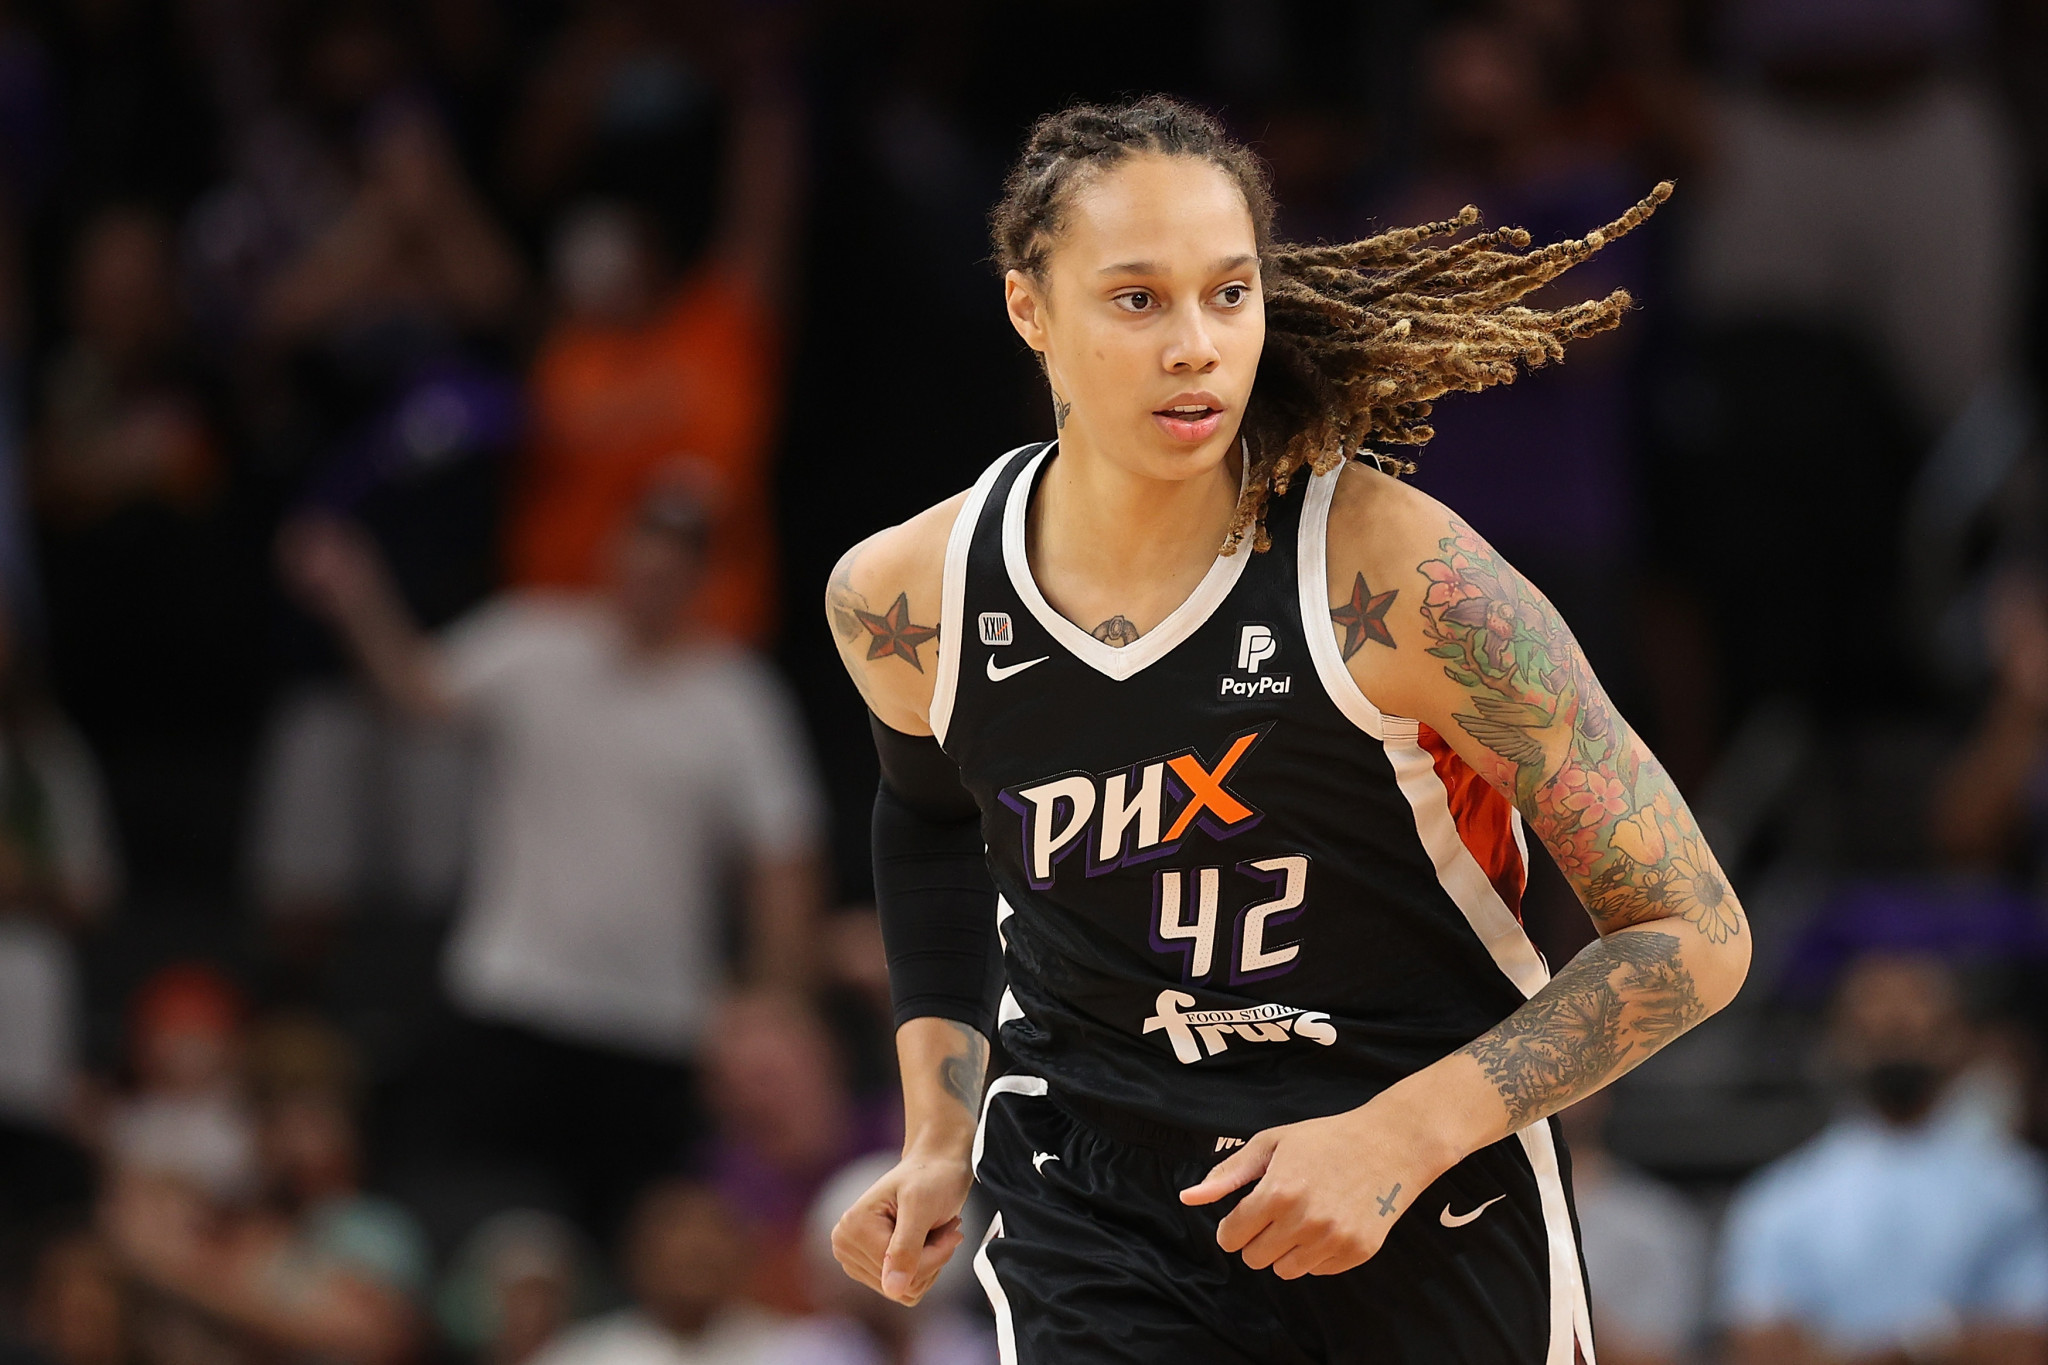 Olympic champion Griner pleads guilty to drugs charges in Russian court